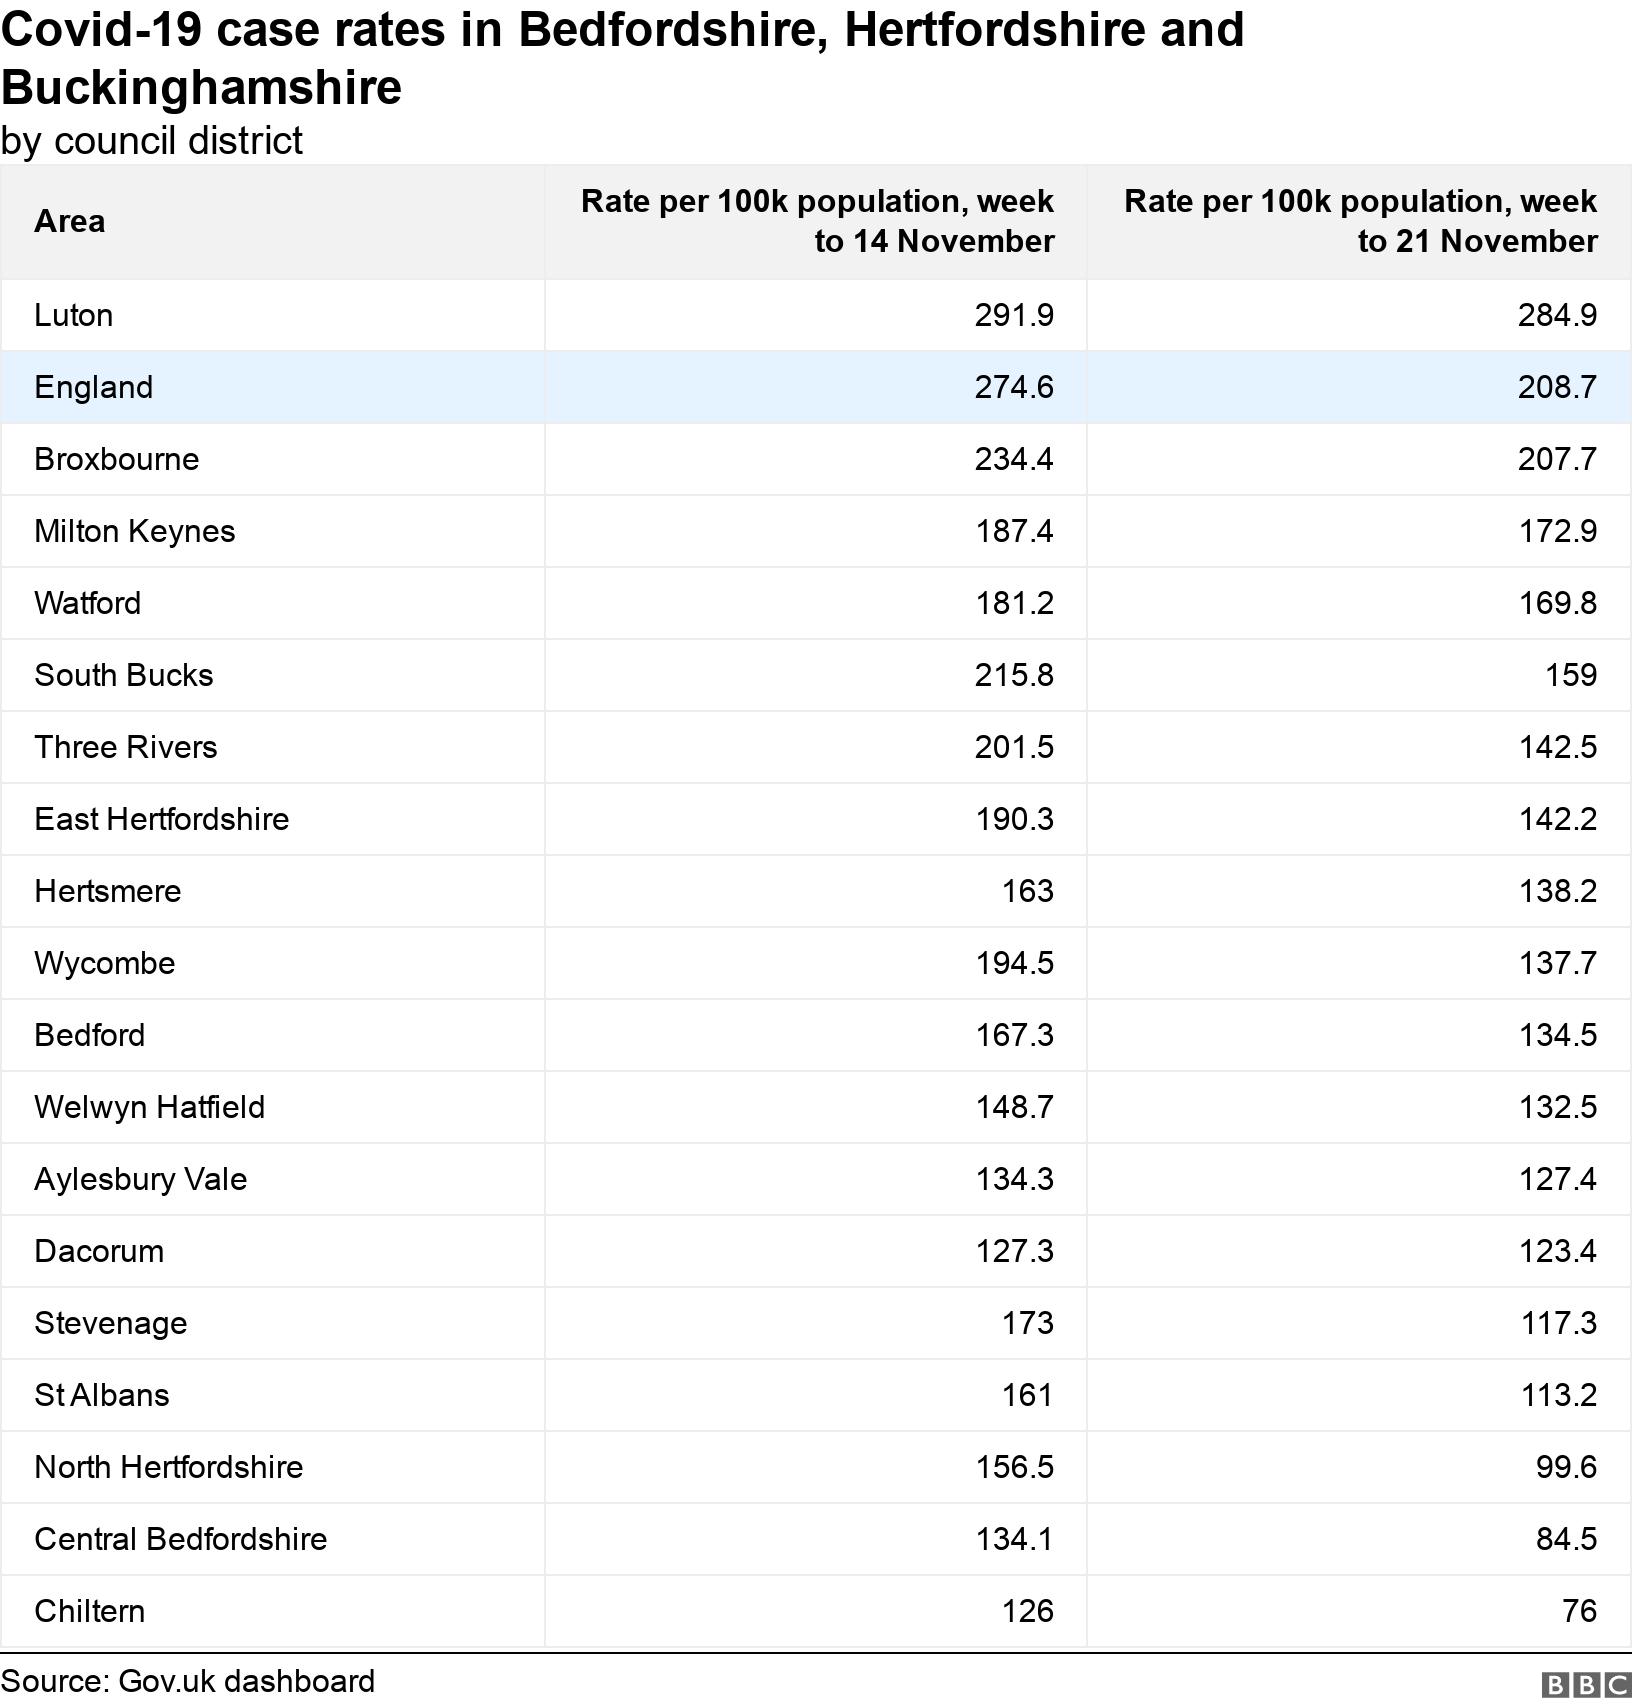 Covid-19 case rates in Bedfordshire, Hertfordshire and Buckinghamshire. by council district. .